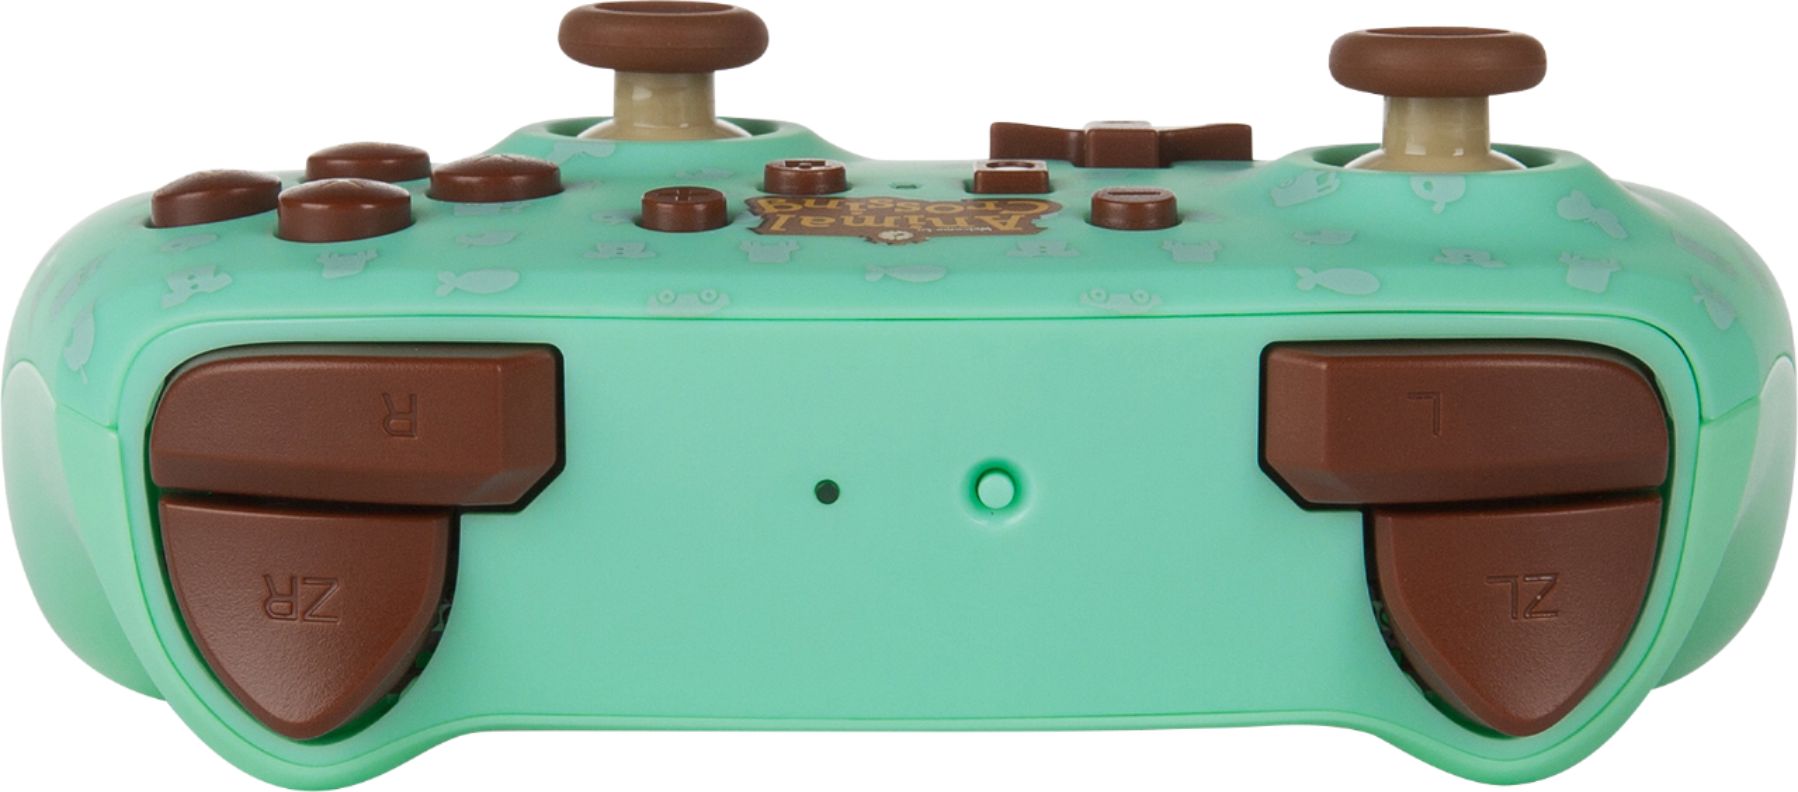 best controller for animal crossing